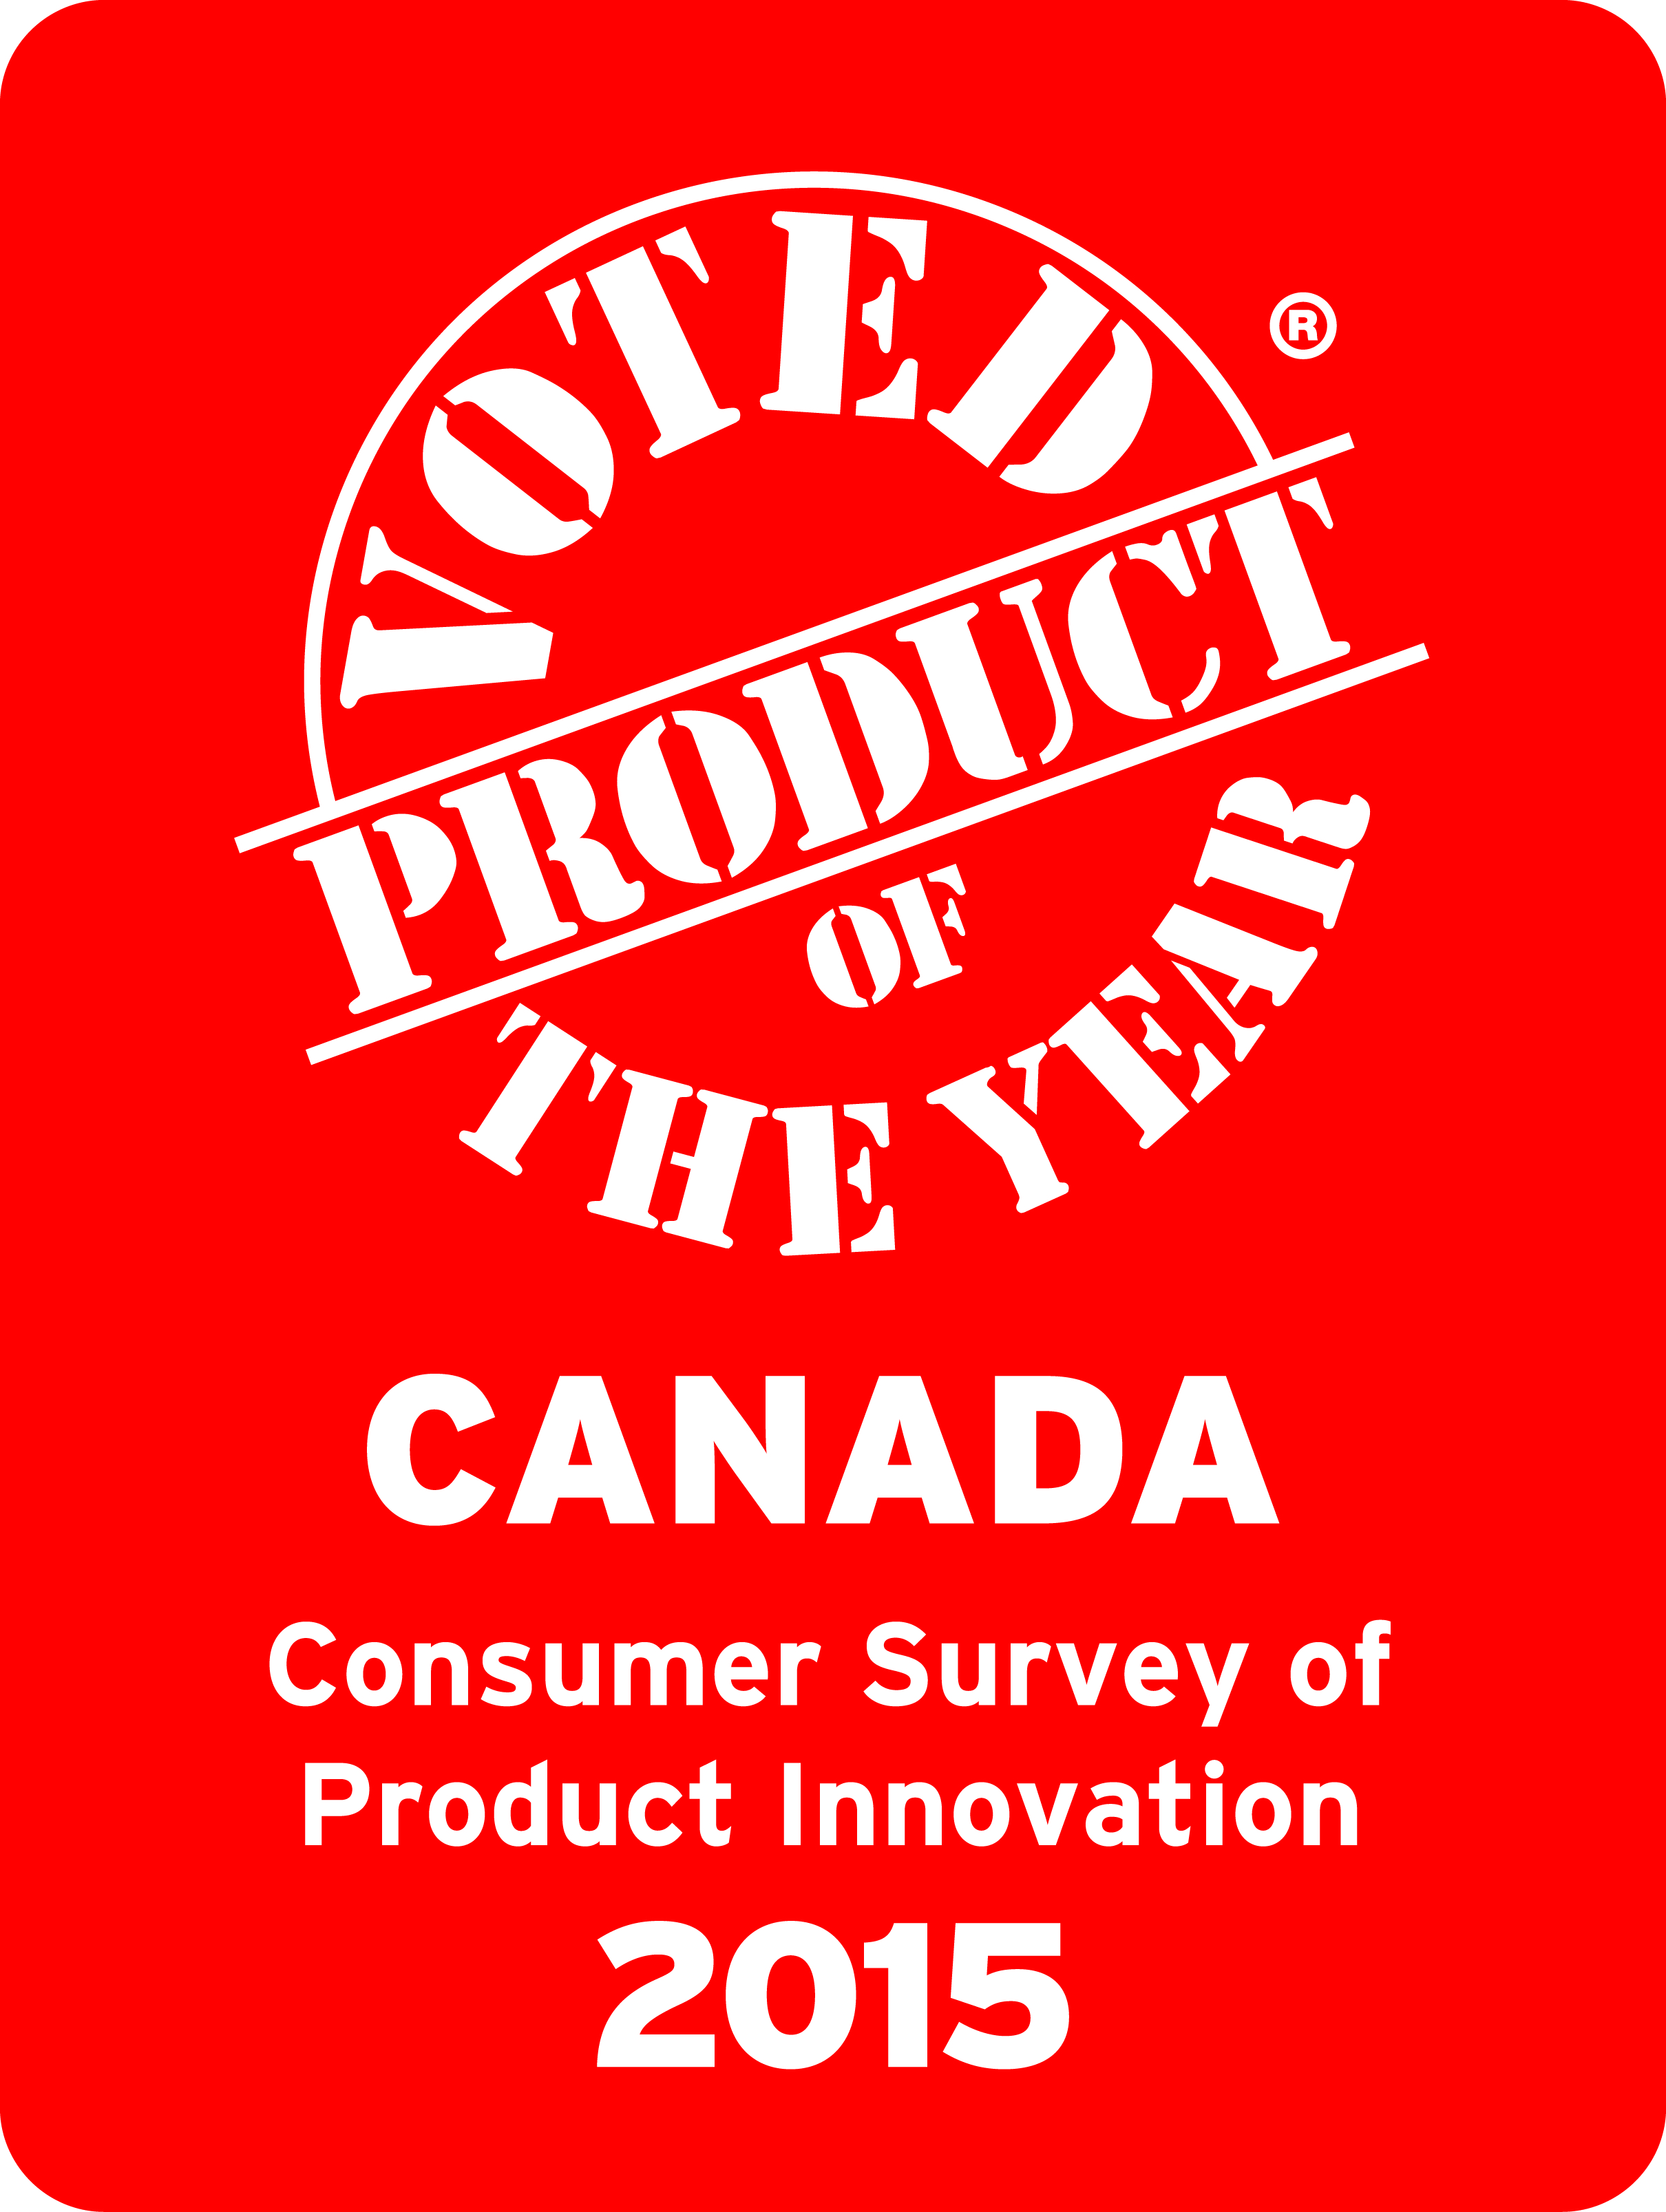 An image of the product of the year award, given to UNSTICK.